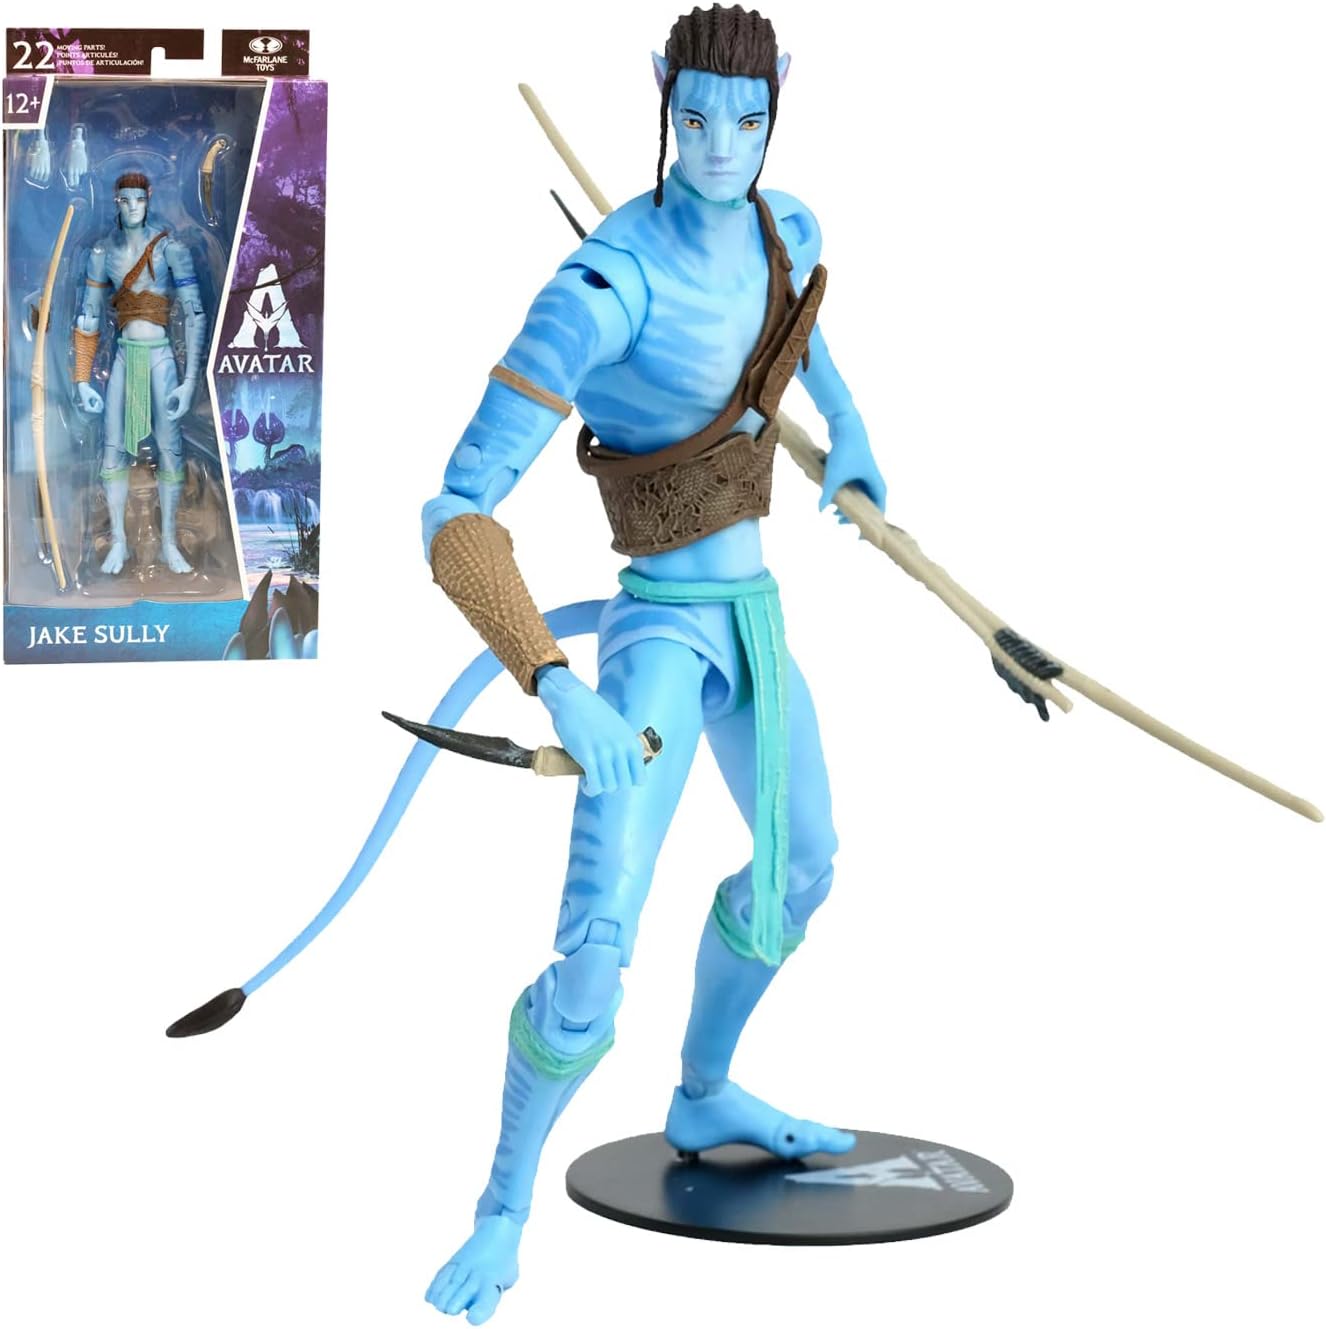 Mcfarlane Toys Disney Avatar Classic Jake Sully 7 Inch Action Figure